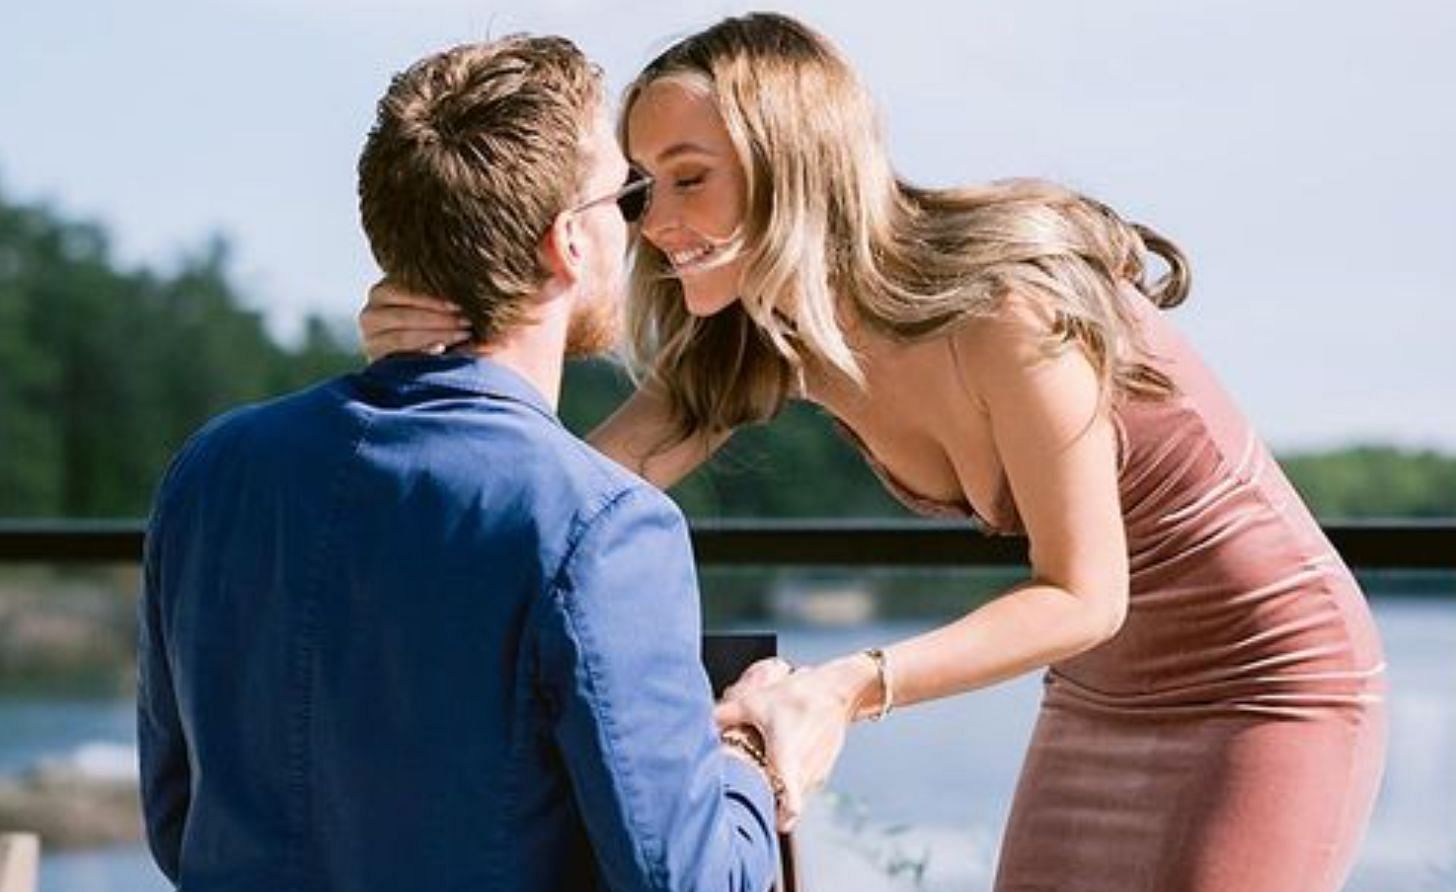 Connor McDavid reveals his role as wedding planner ahead of his big day with Lauren Kyle